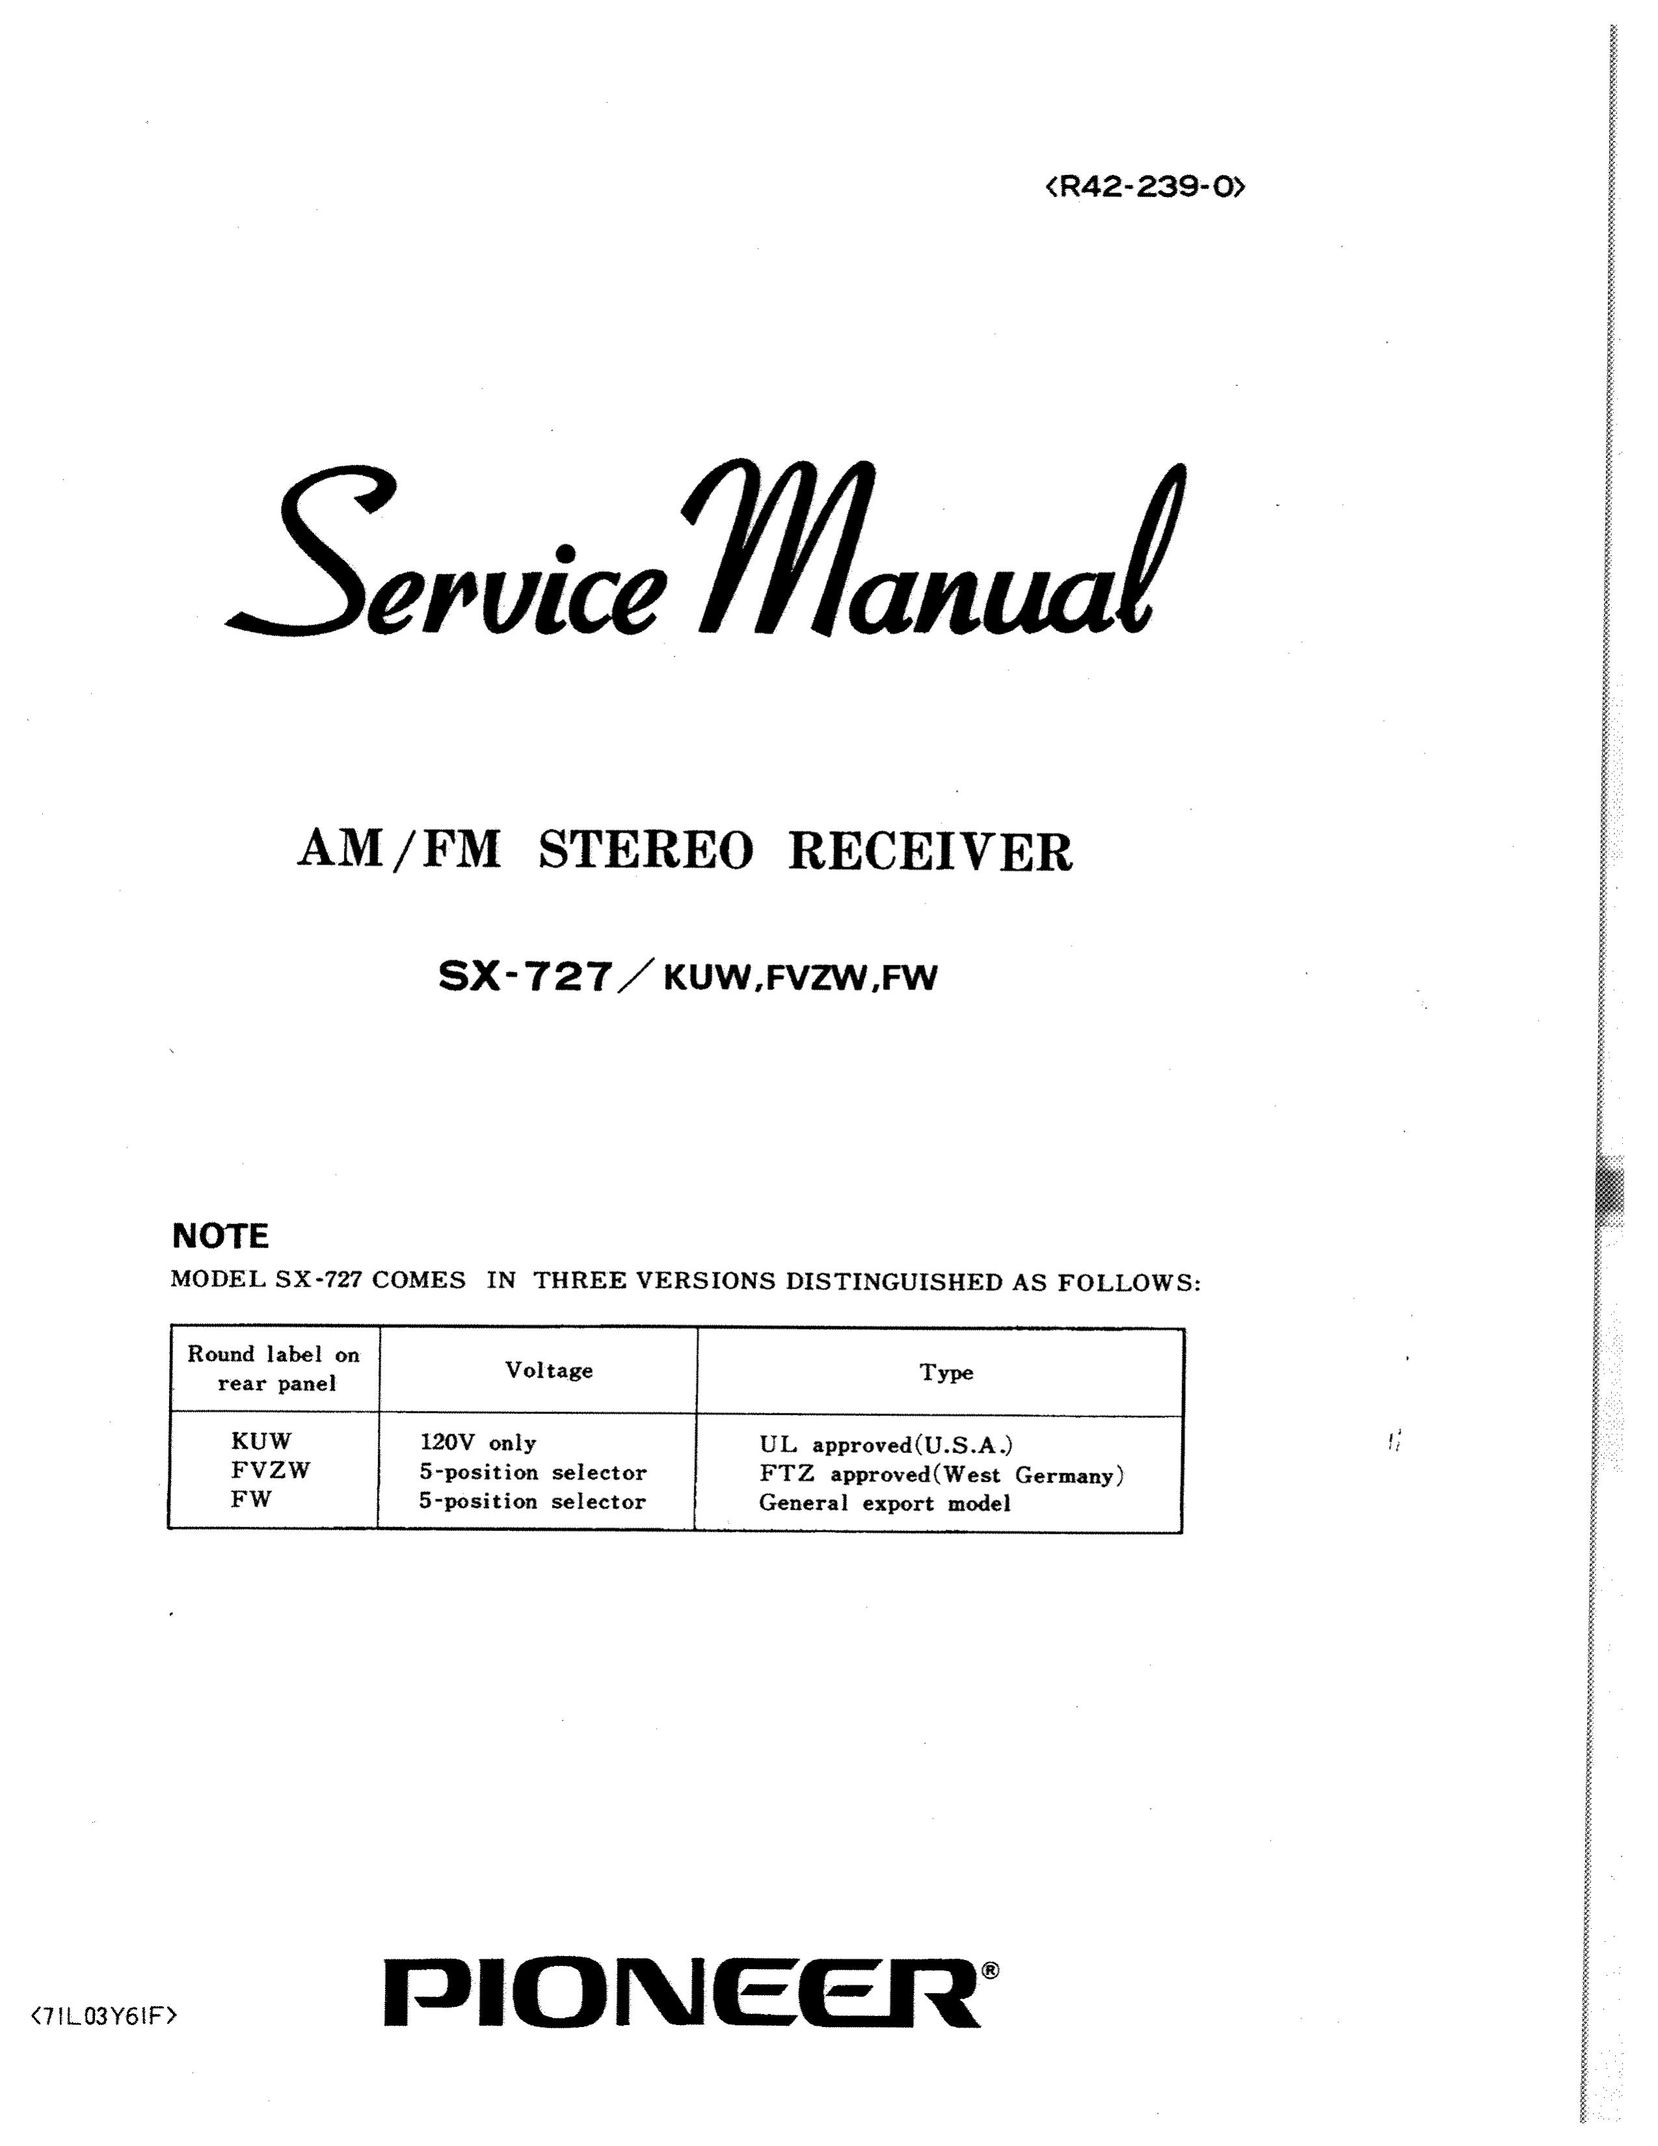 Pioneer FVZW Stereo Receiver User Manual